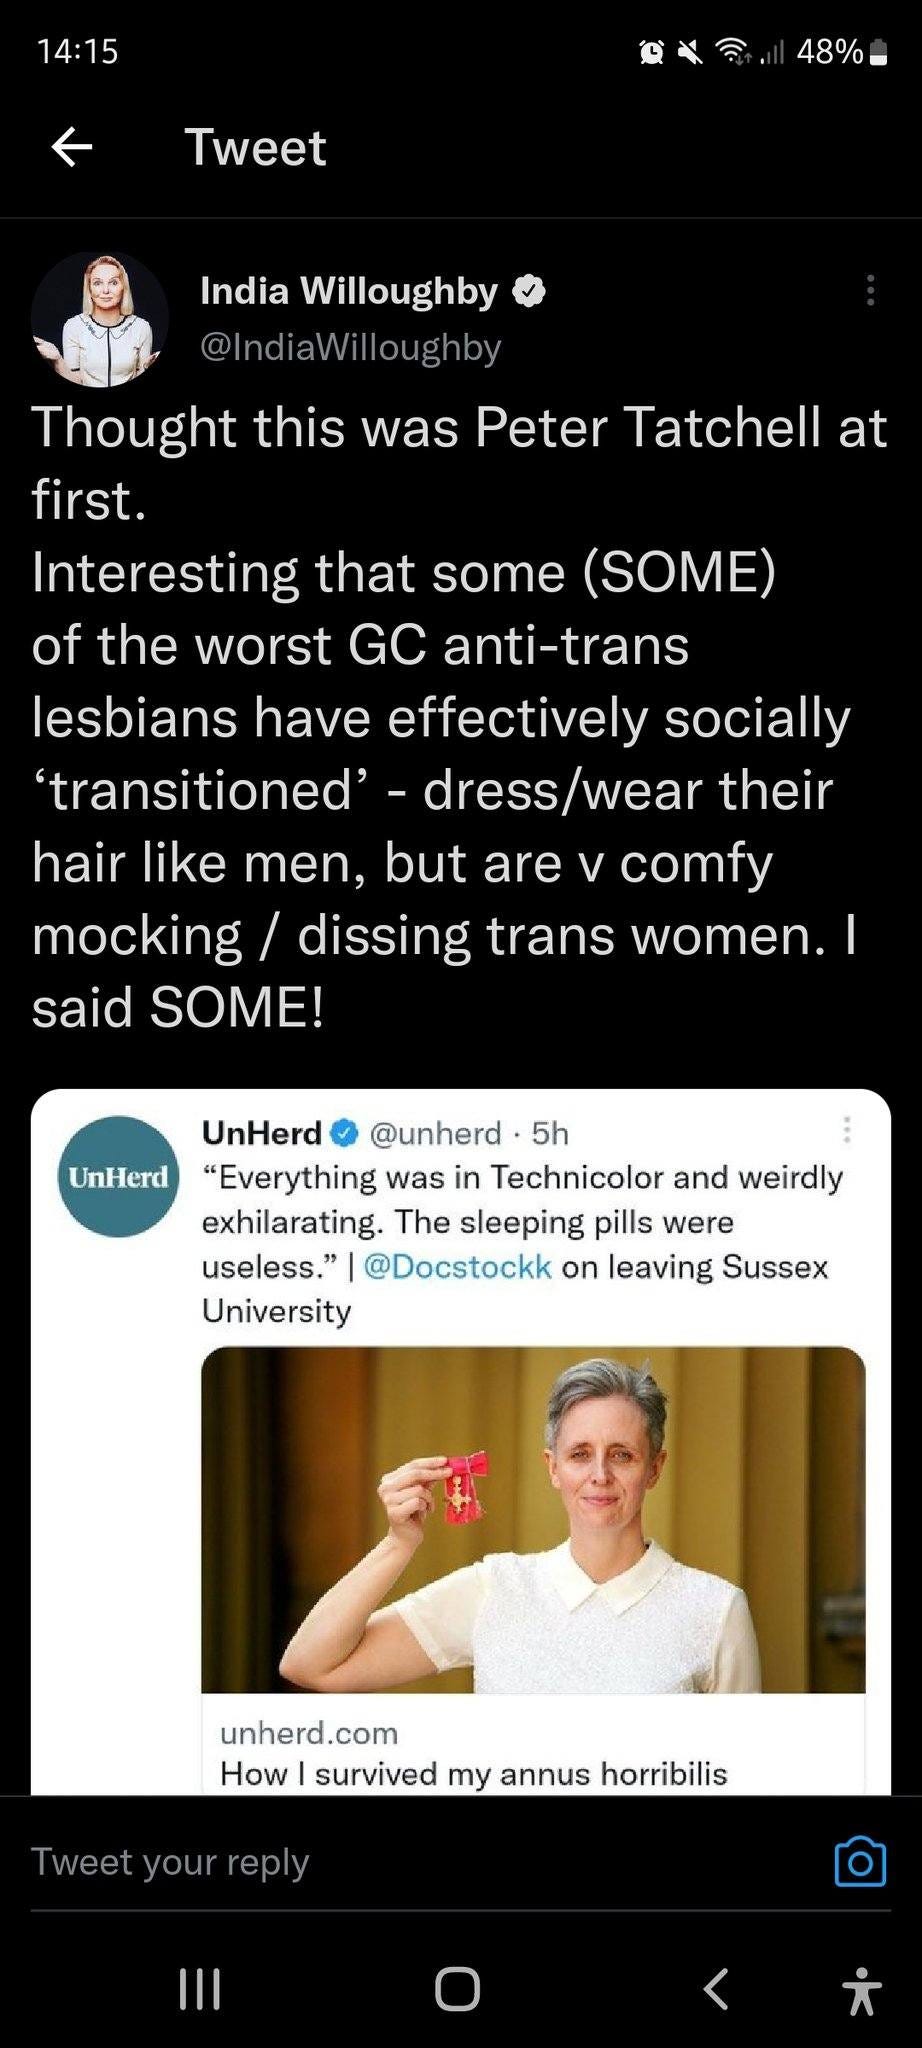 May be a Twitter screenshot of 2 people and text that says '14:15 ← 48% Tweet India Willoughby @IndiaW Thought this was Peter Tatchell at first. Interesting that some (SOME) of the worst GC anti-trans lesbians have effectively socially 'transitioned' dress/wear their hair like men, but are V comfy mocking dissing trans women.| said SOME! UnHerd @unherd 5h UnHerd "Everything was Technicolor and weirdly exhilarating. The sleeping pills were useless." @Docstockk on leaving Sussex University unherd.com com How survived my annus horribilis Tweet your reply'